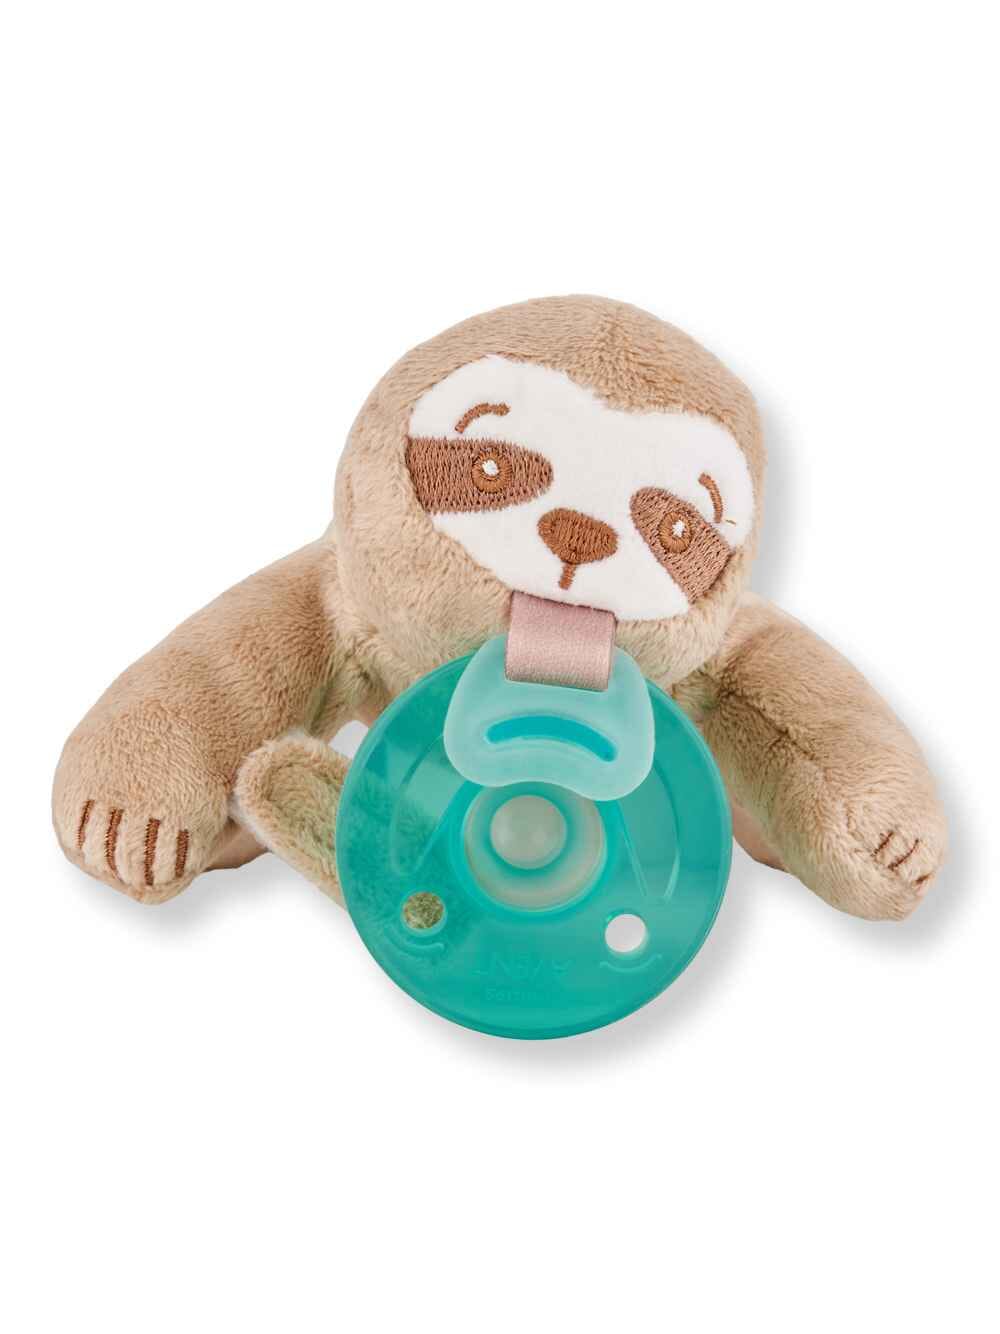 Philips Avent Philips Avent Soothie Snuggle 0m+ Sloth Pacifiers & Soothers 